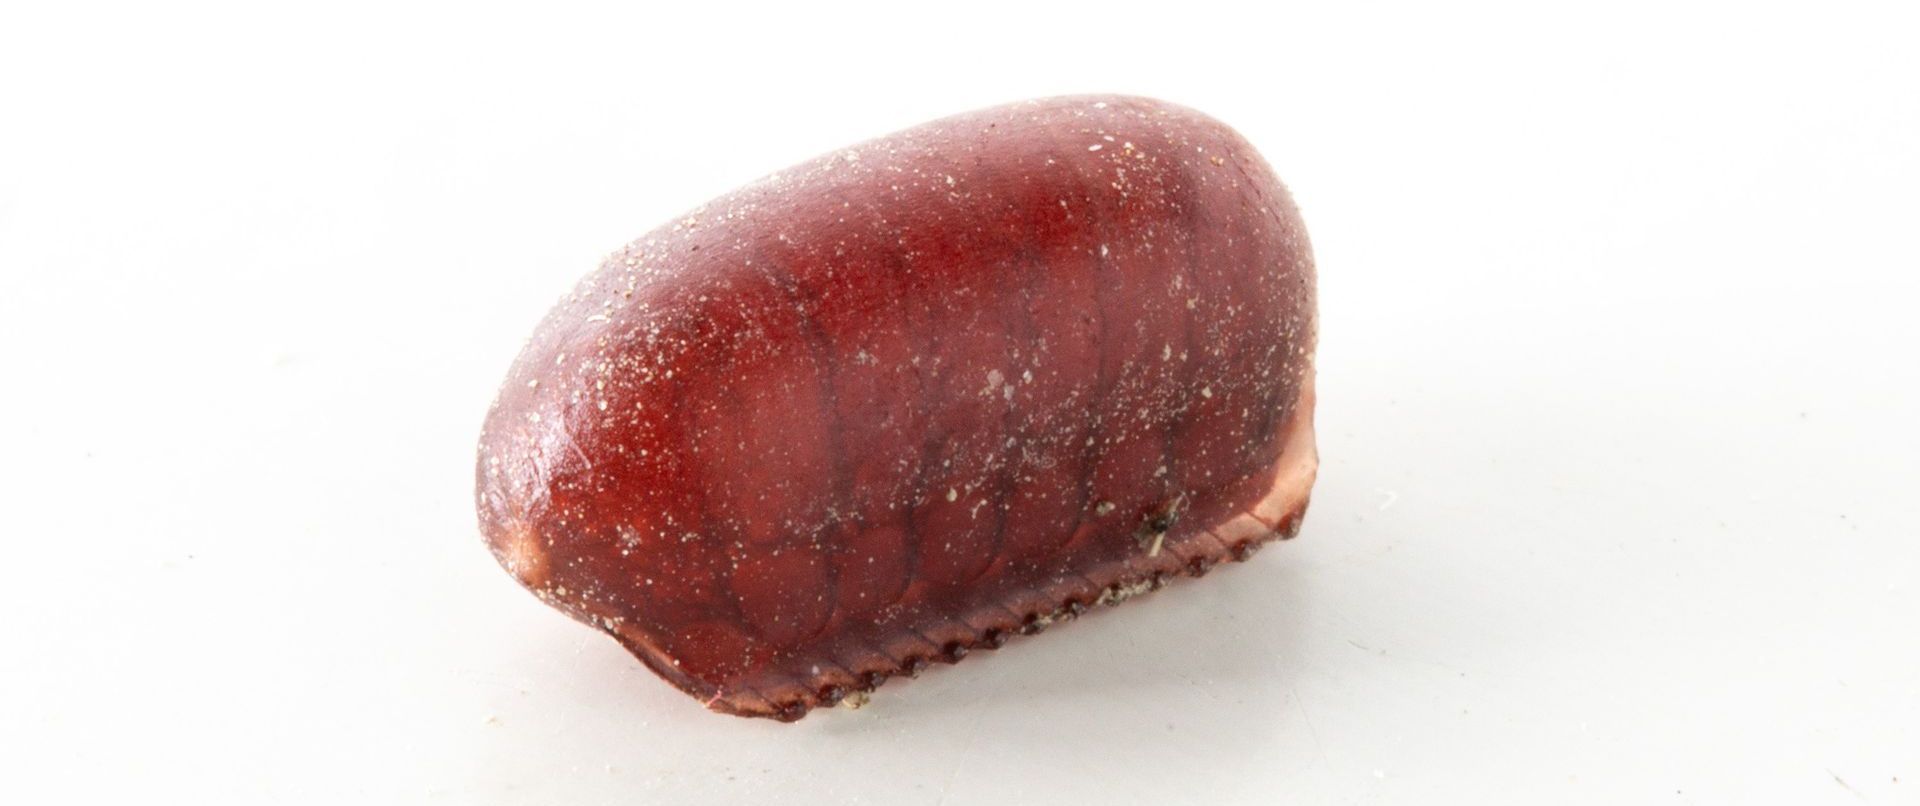 image of oriental cockroach egg